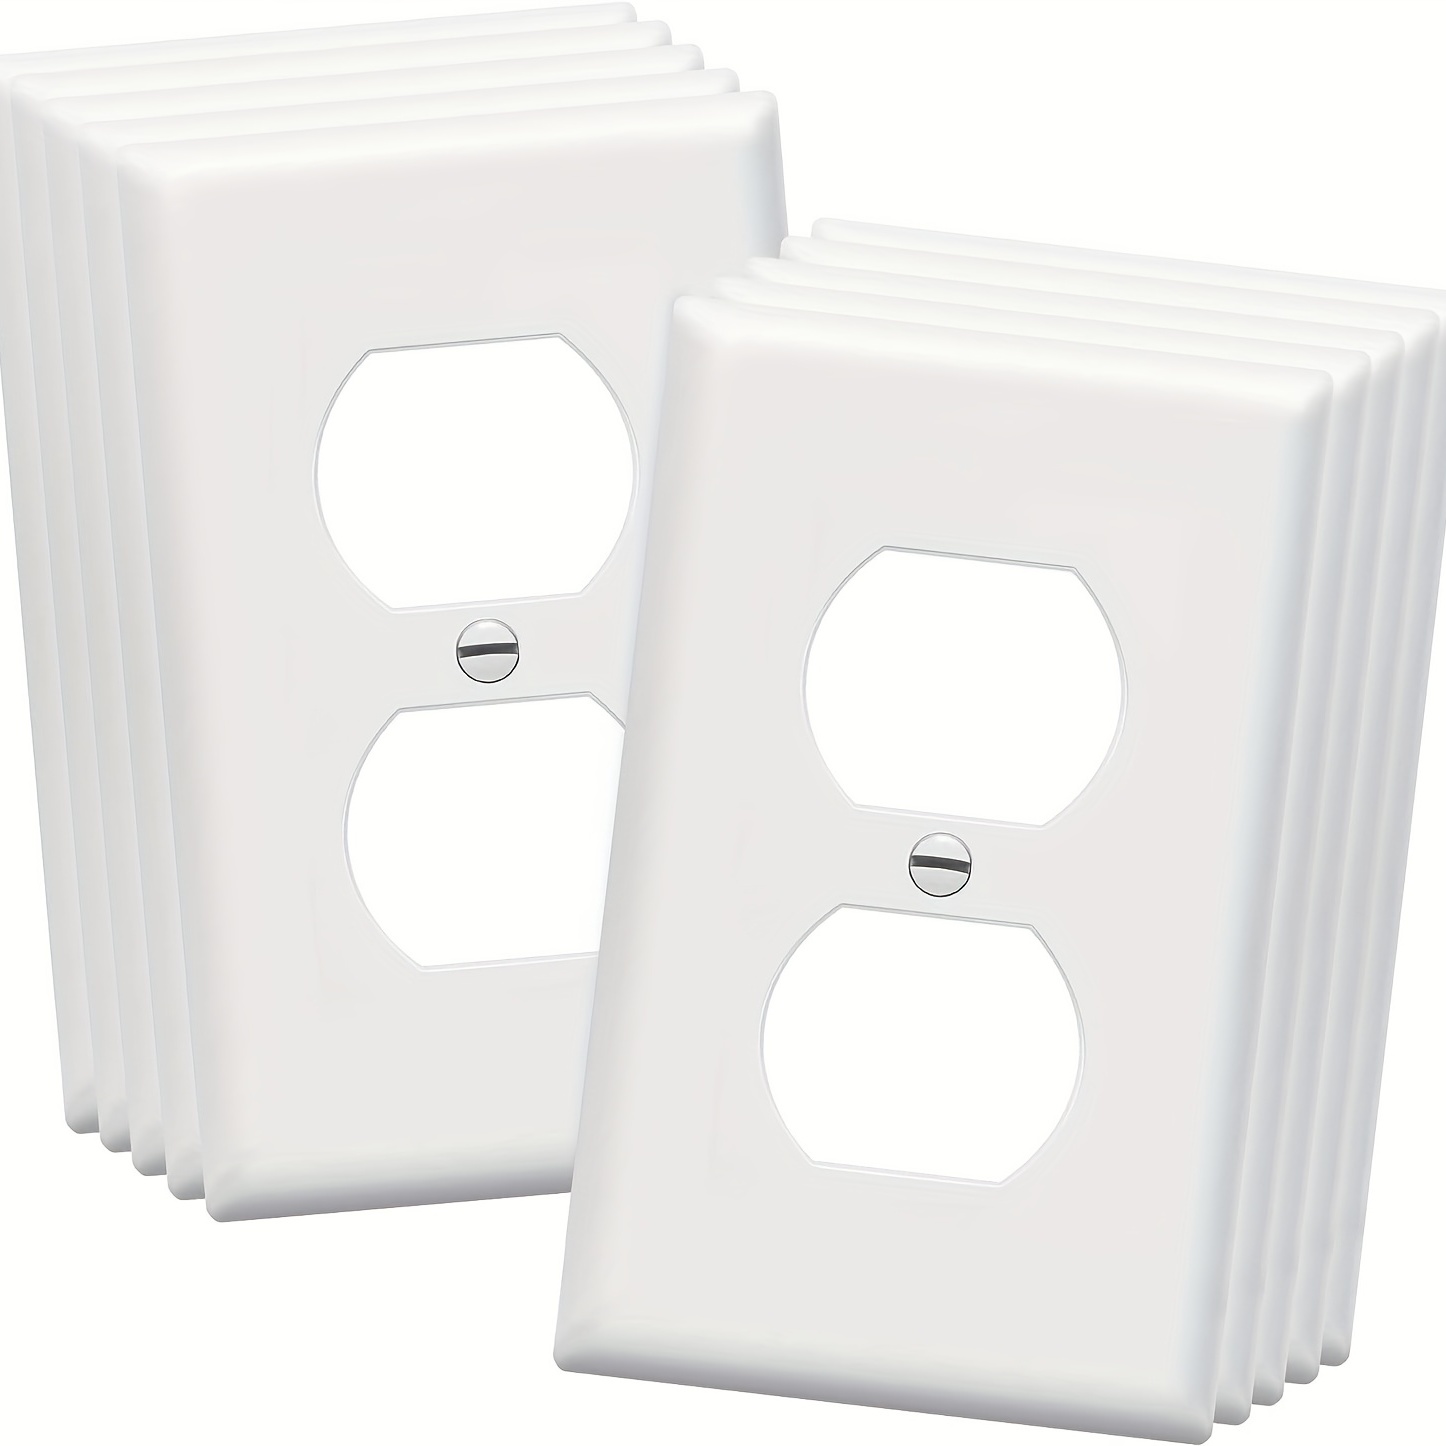 2pcs/10pcs Wall Plates Kit, Electrical Outlet Covers, Standard Size  Unbreakable Polycarbonate Thermoplastic, Electric Receptacle Plug Covers,,  White